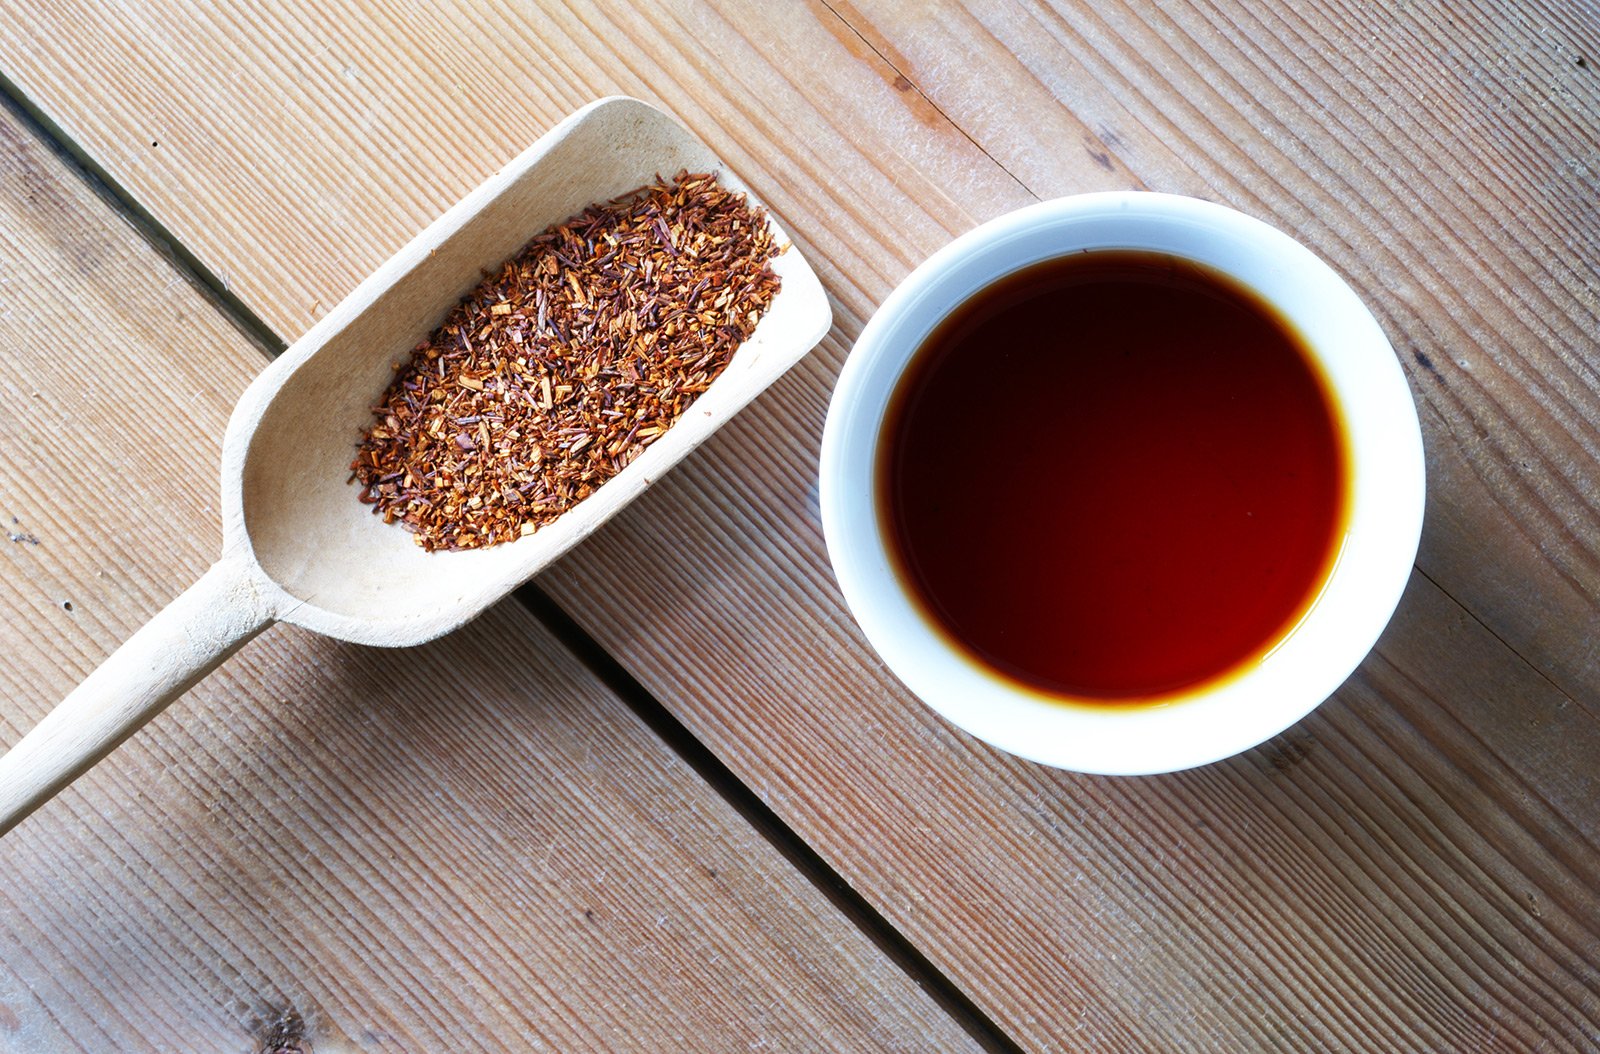 How to try rooibos in Cape Town